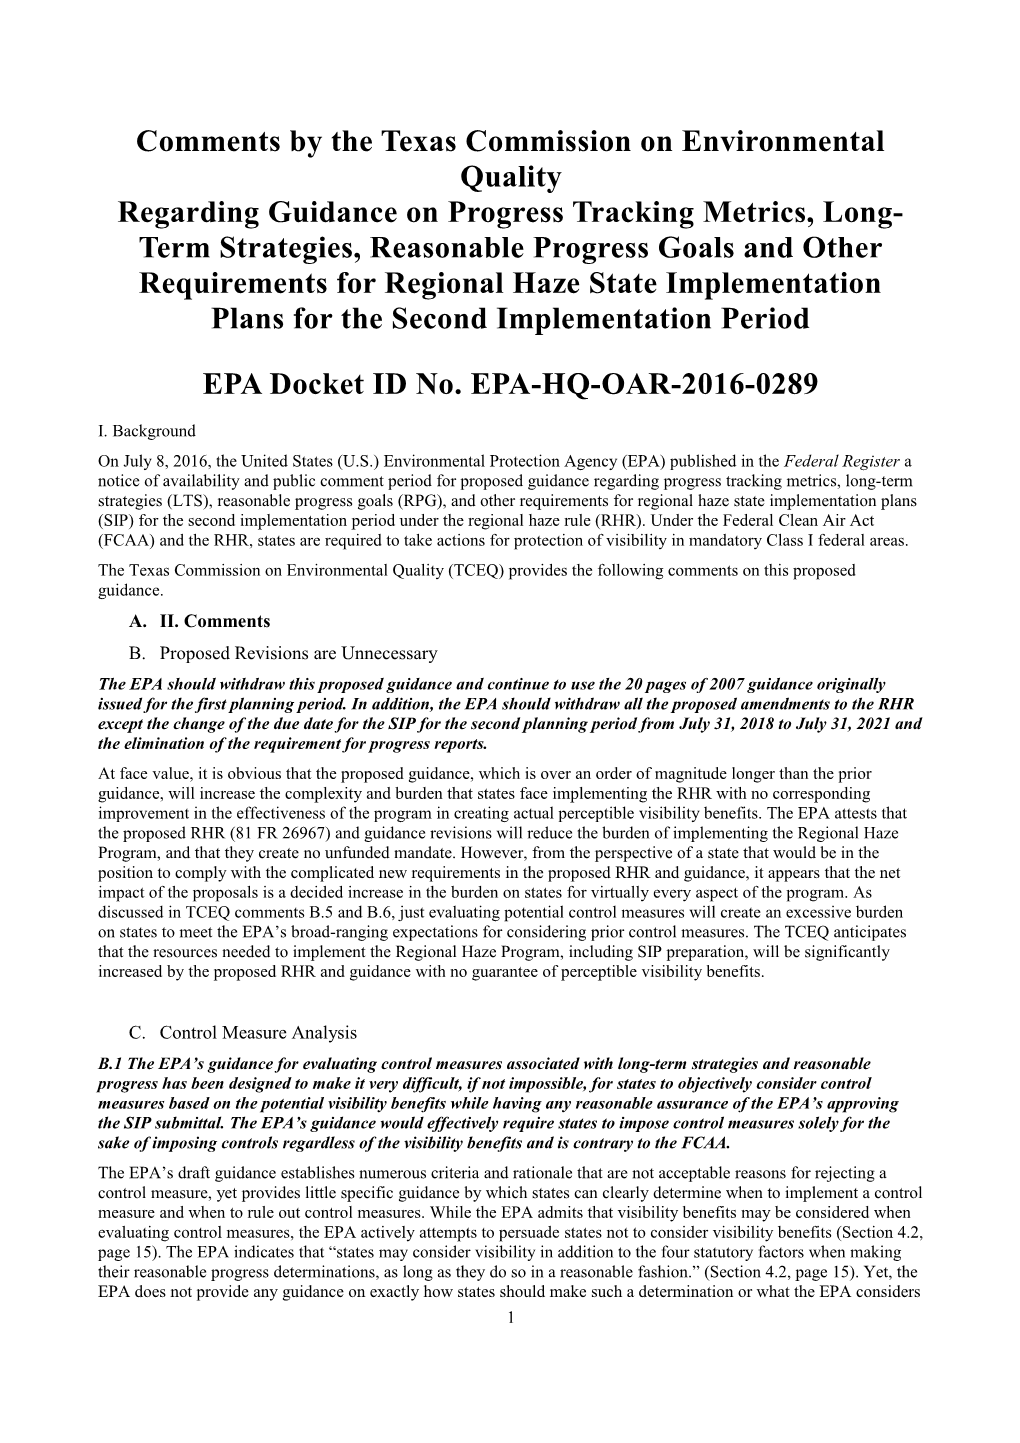 Comments by the Texas Commission on Environmental Quality